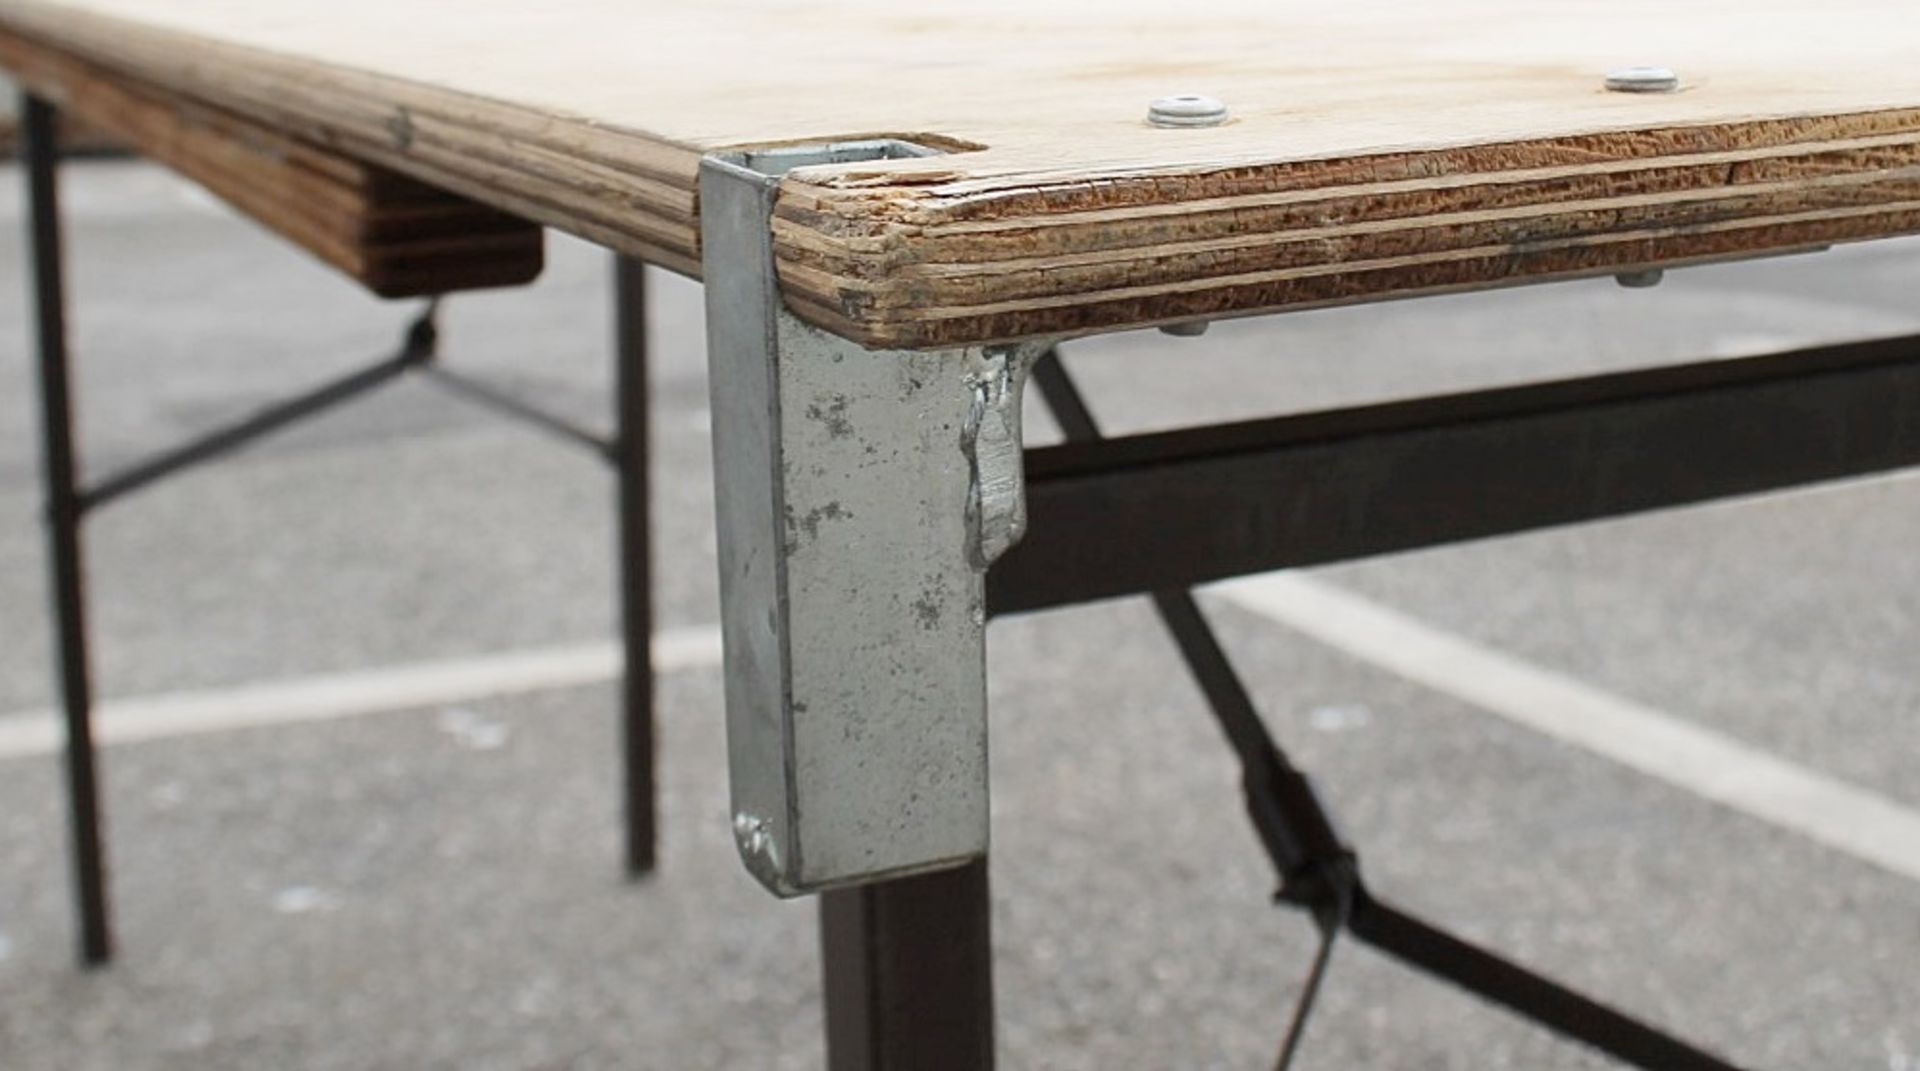 1 x Folding 6ft Wooden Topped Rectangular Trestle Table - Recently Removed From A Well-known - Image 4 of 6